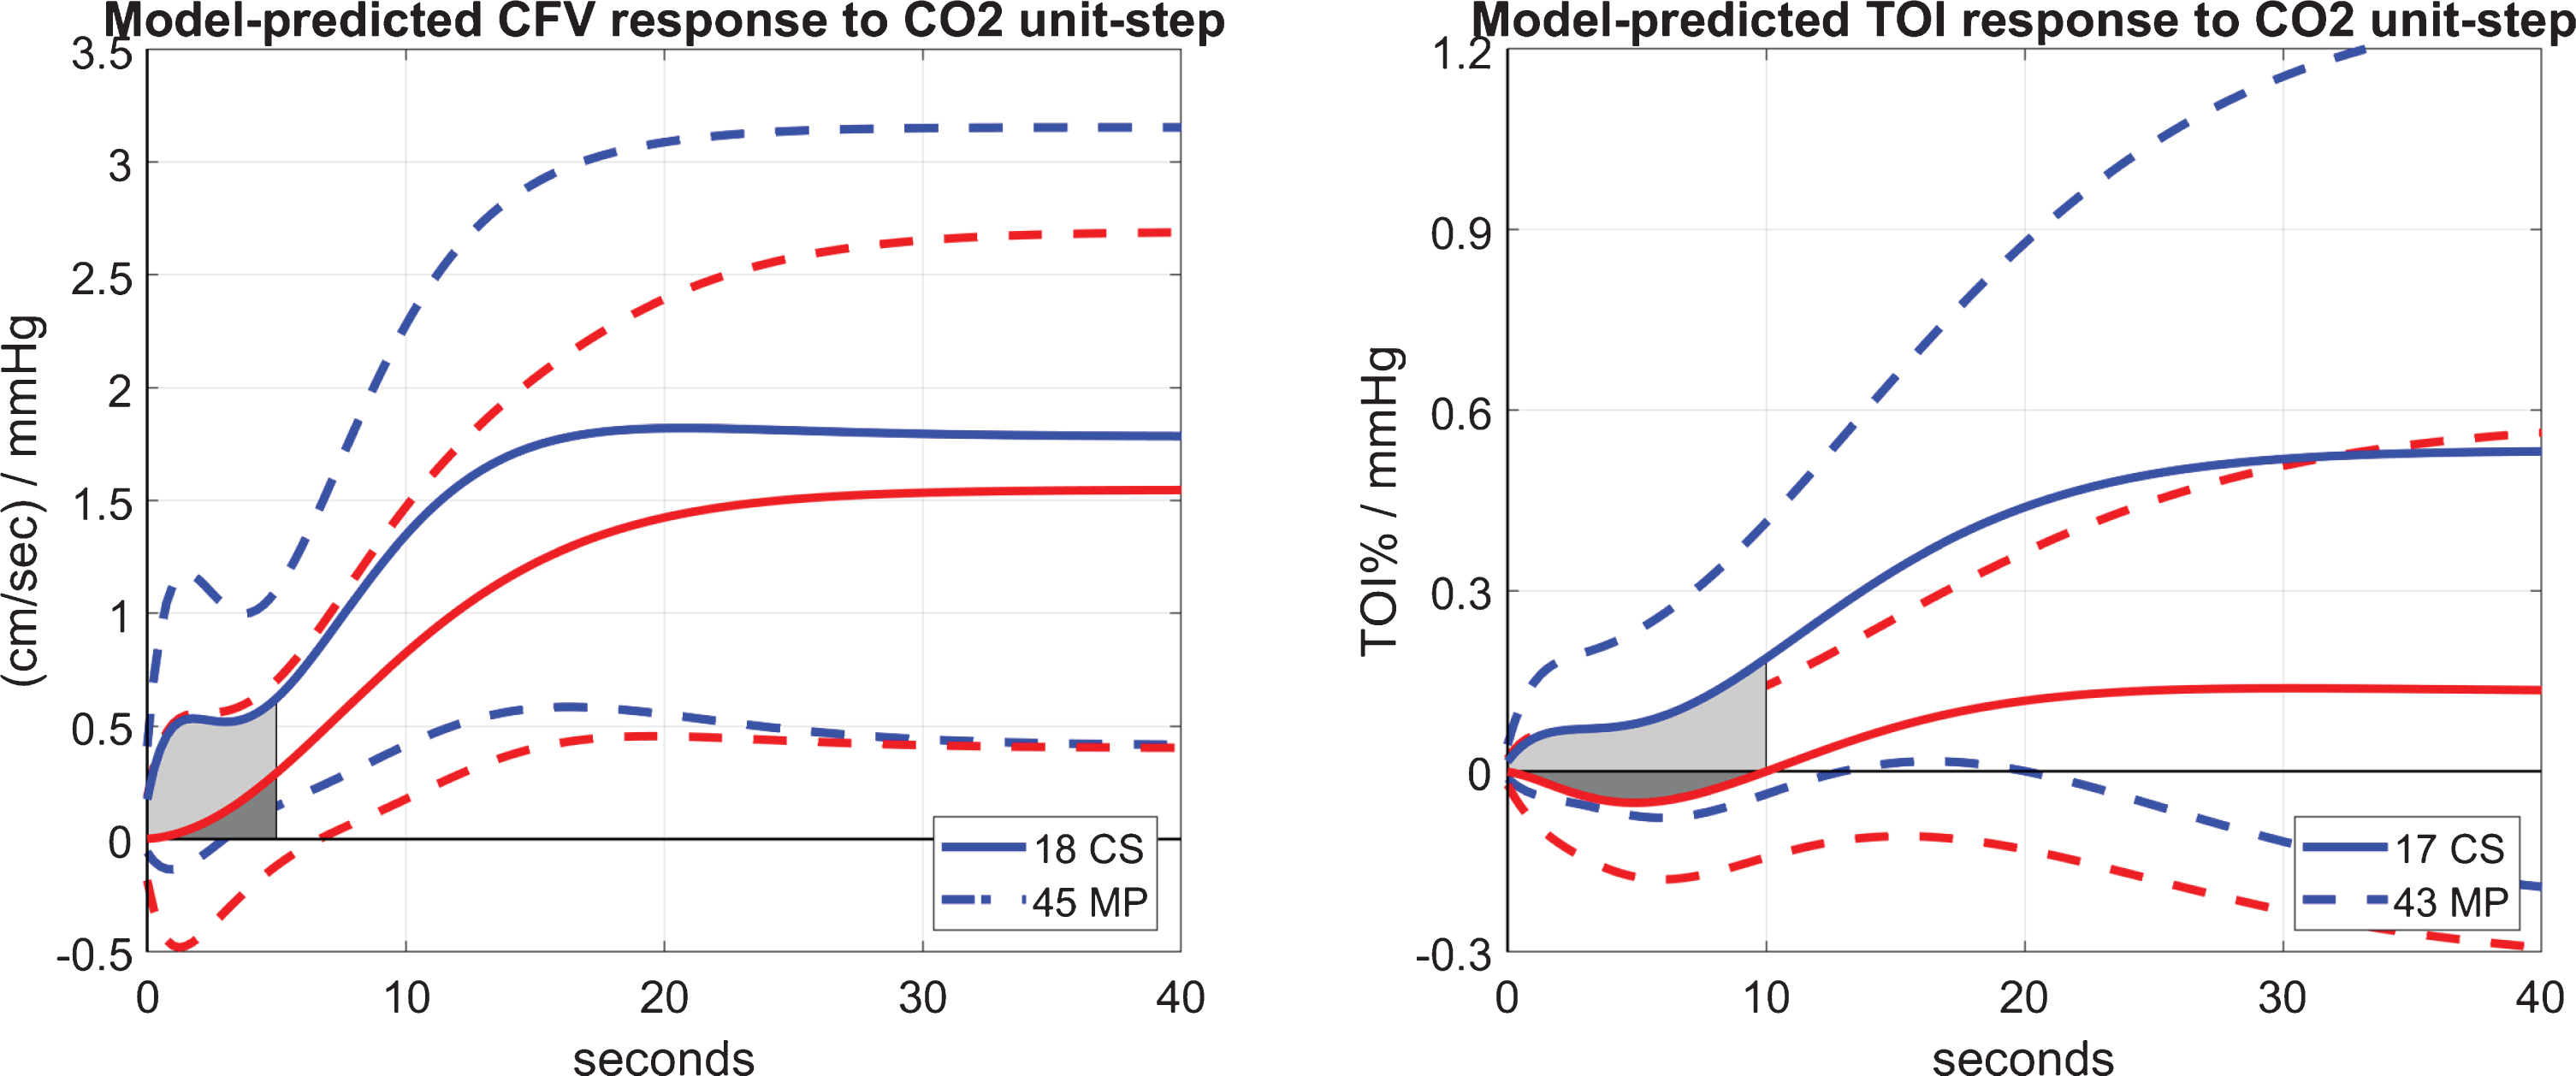 Average model-predicted response to a unit-step CO2 input over 18 CS (blue line) and 45 MP (red line) for the CFV output (left panel), and over 17 CS (blue line) and 43 MP (red line) for the TOI output (right panel). The SD bounds are also shown with dashed lines.